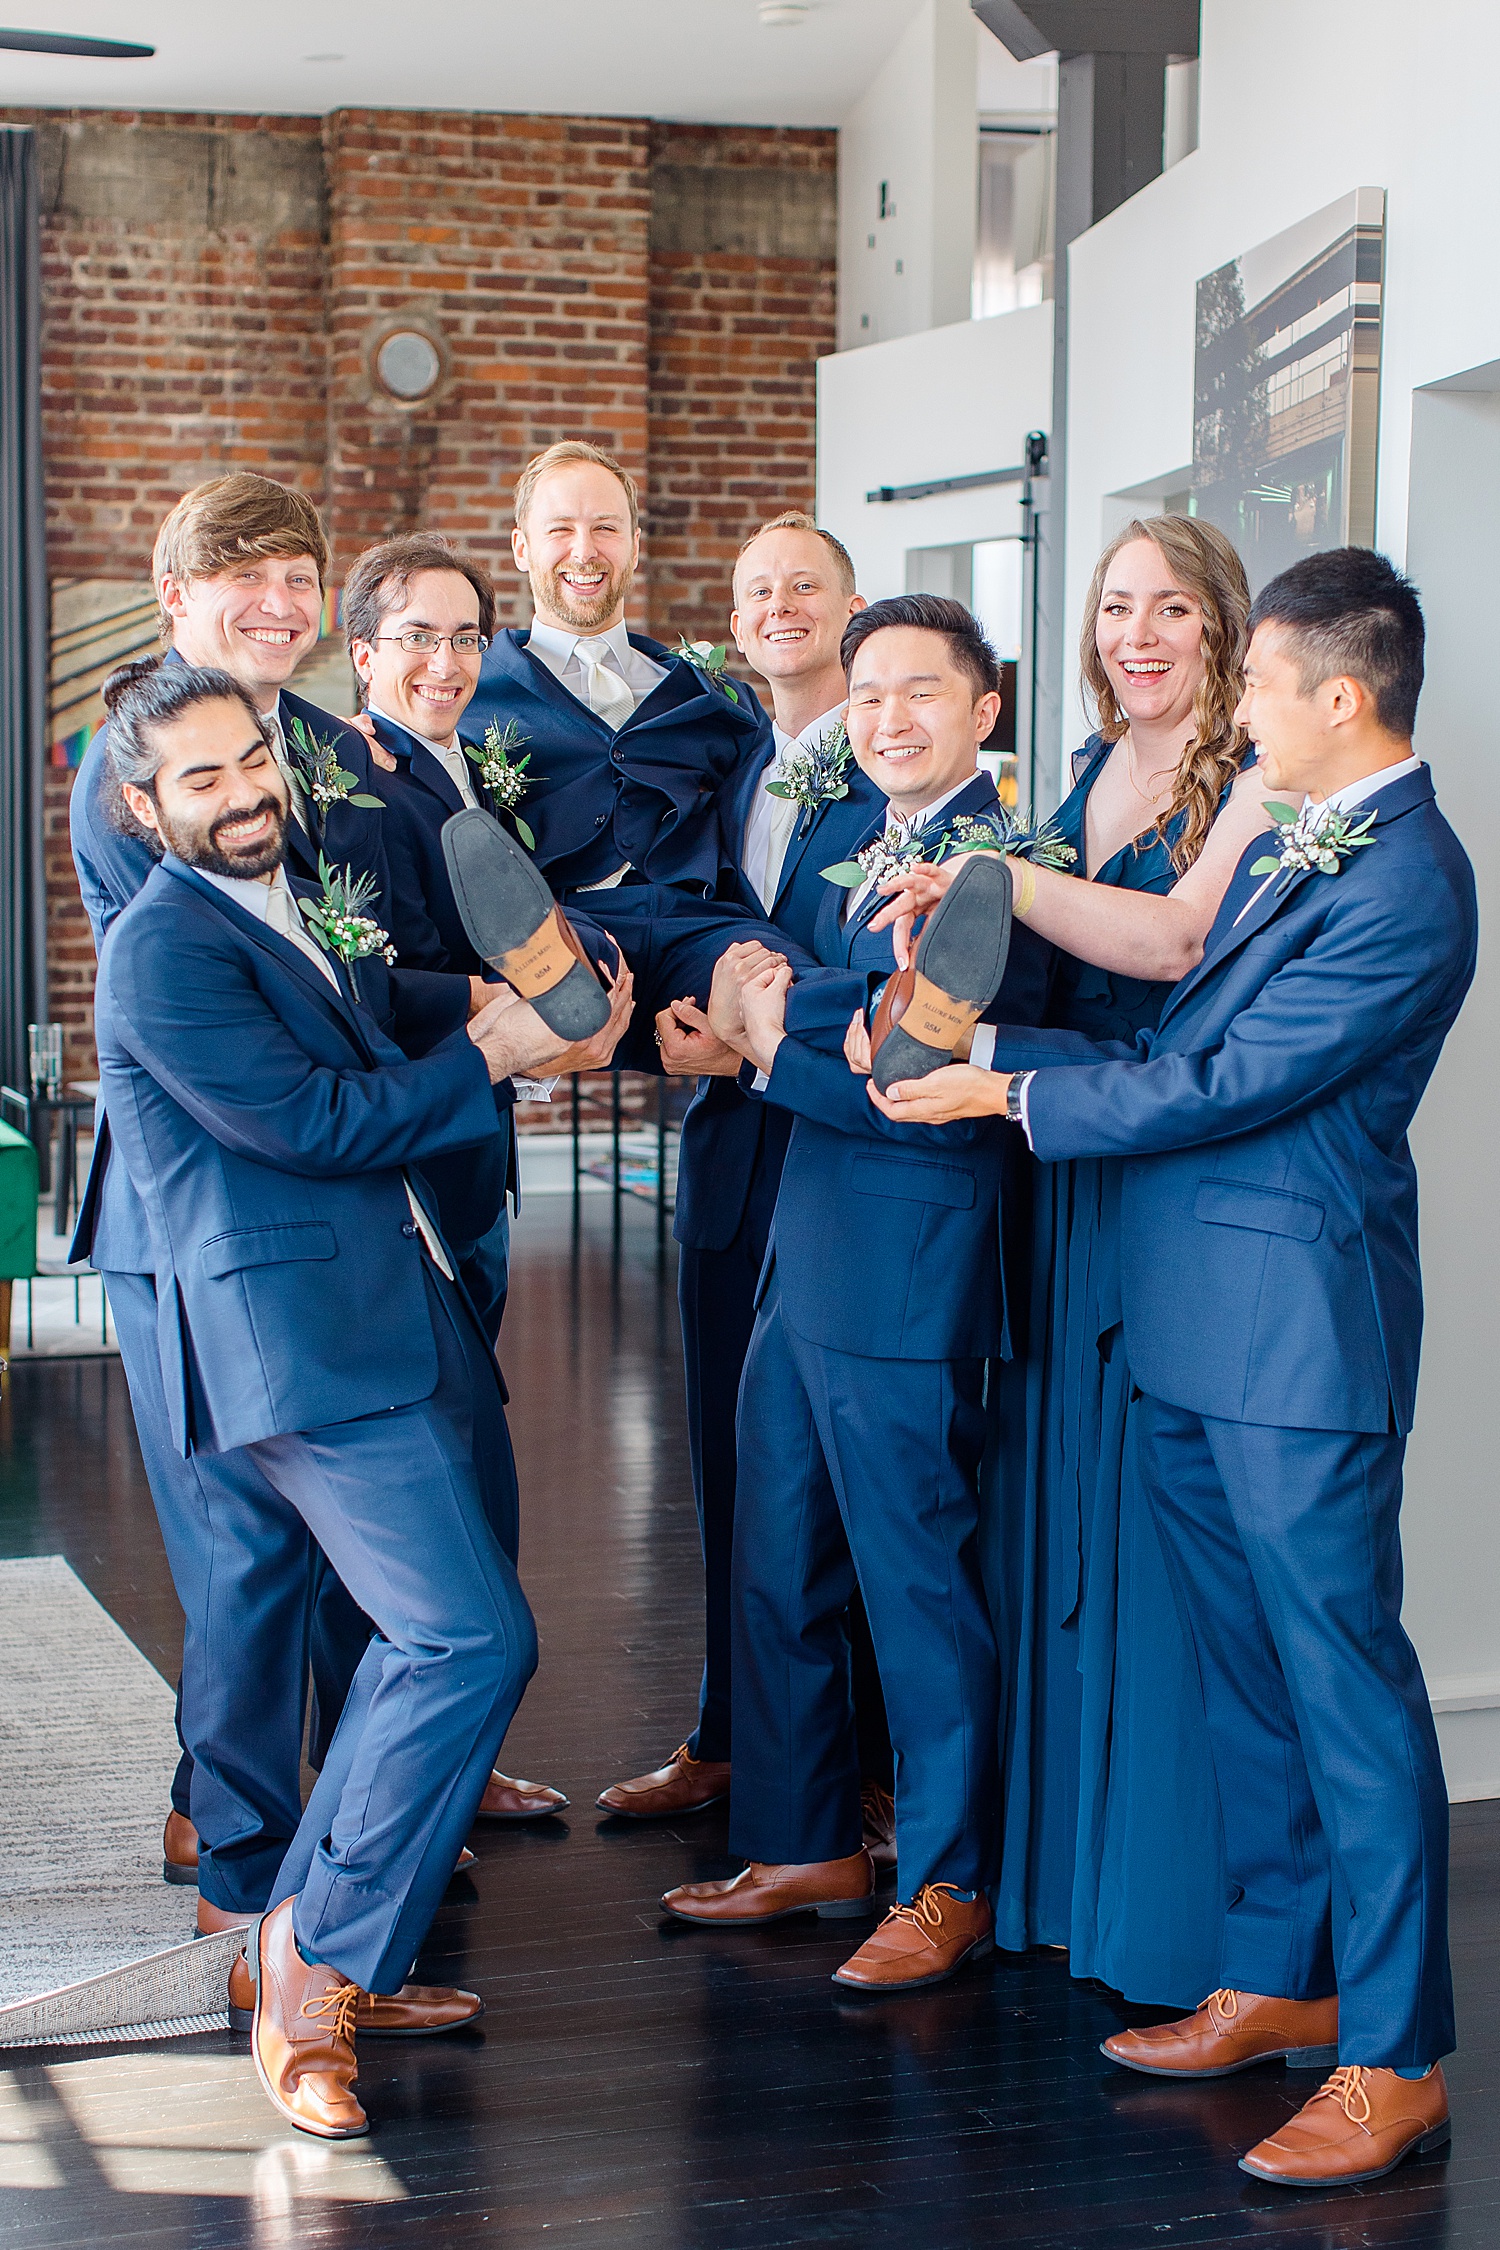 groomsmen lift the groom up in the air